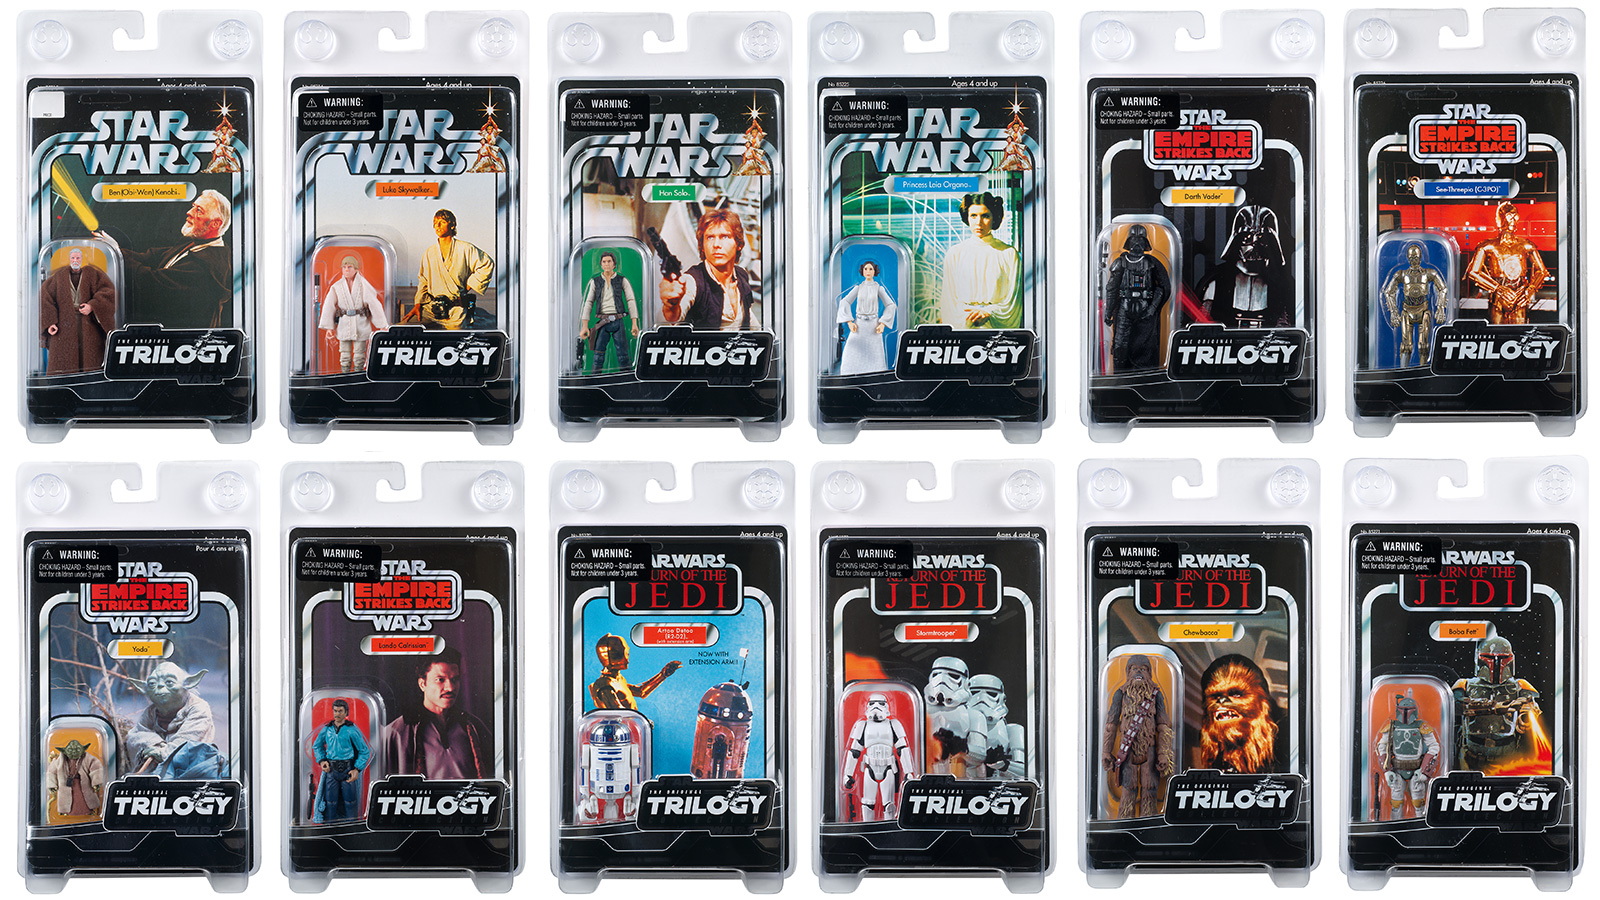 2004 The Original Trilogy Collection Vintage 3.75-Inch Figures Added To Photo Gallery